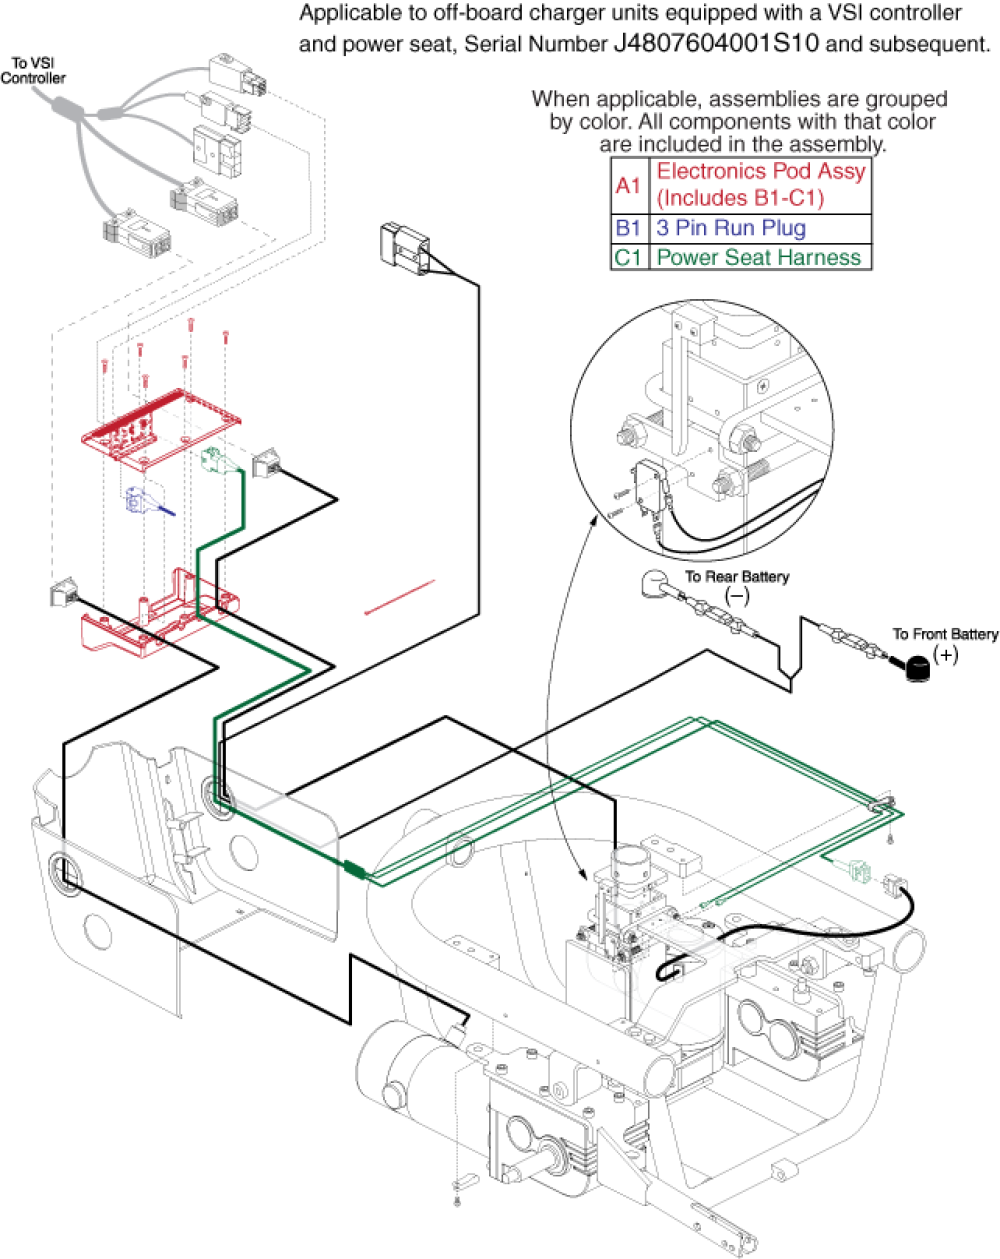 Electronics Tray Assembly - Vsi,power Seat,off-board_gen 2 parts diagram